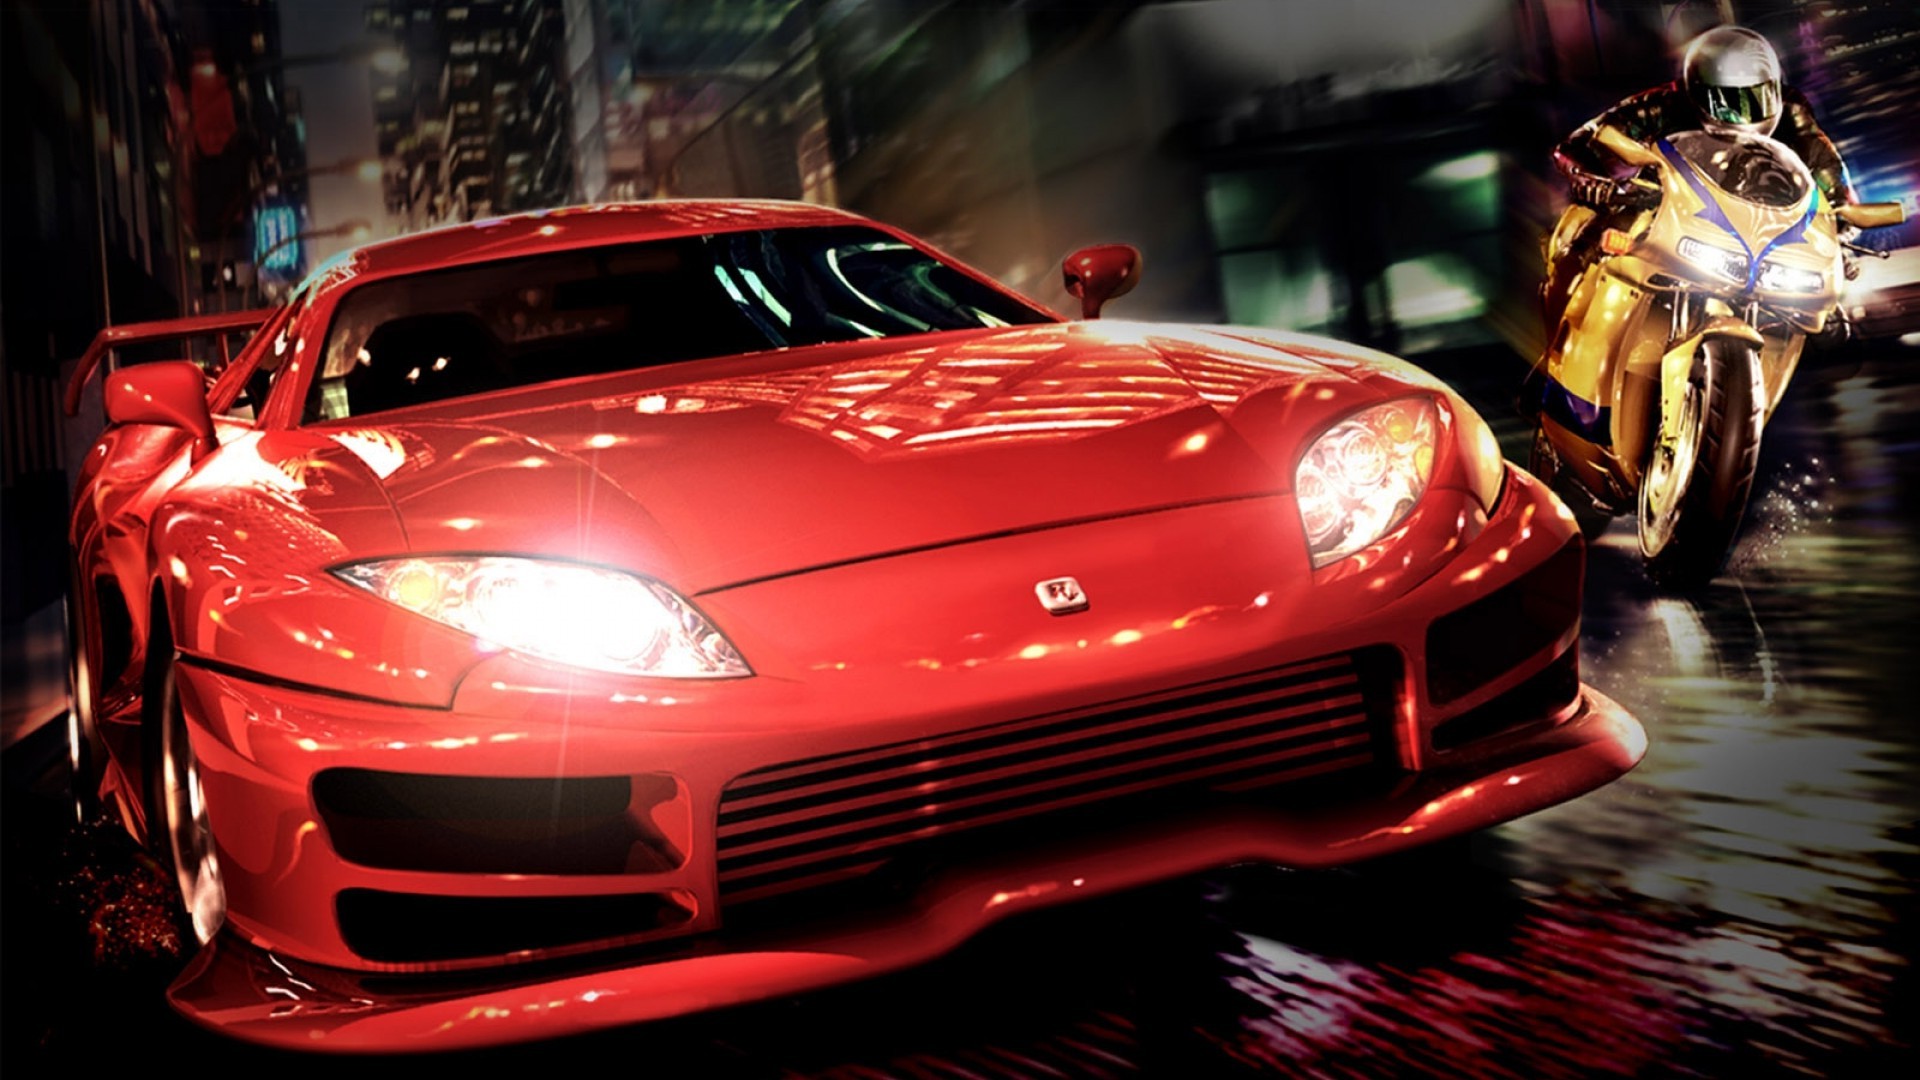 General 1920x1080 city night Toyota Supra car video games red cars motorcycle vehicle Midnight Club 2